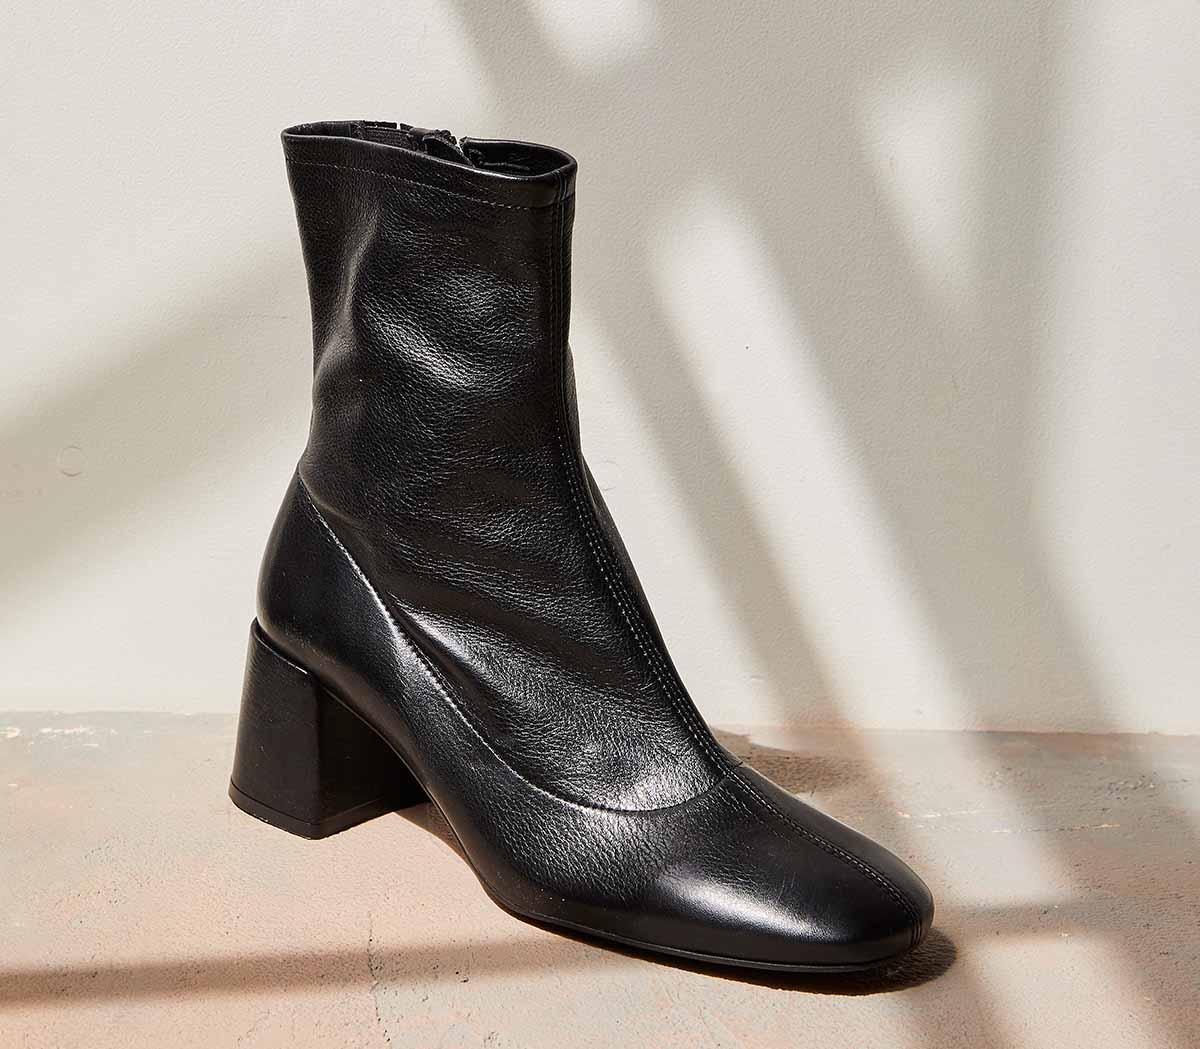 OFFICE Alexia Unlined Ankle Boots Black Leather - Women's Ankle Boots